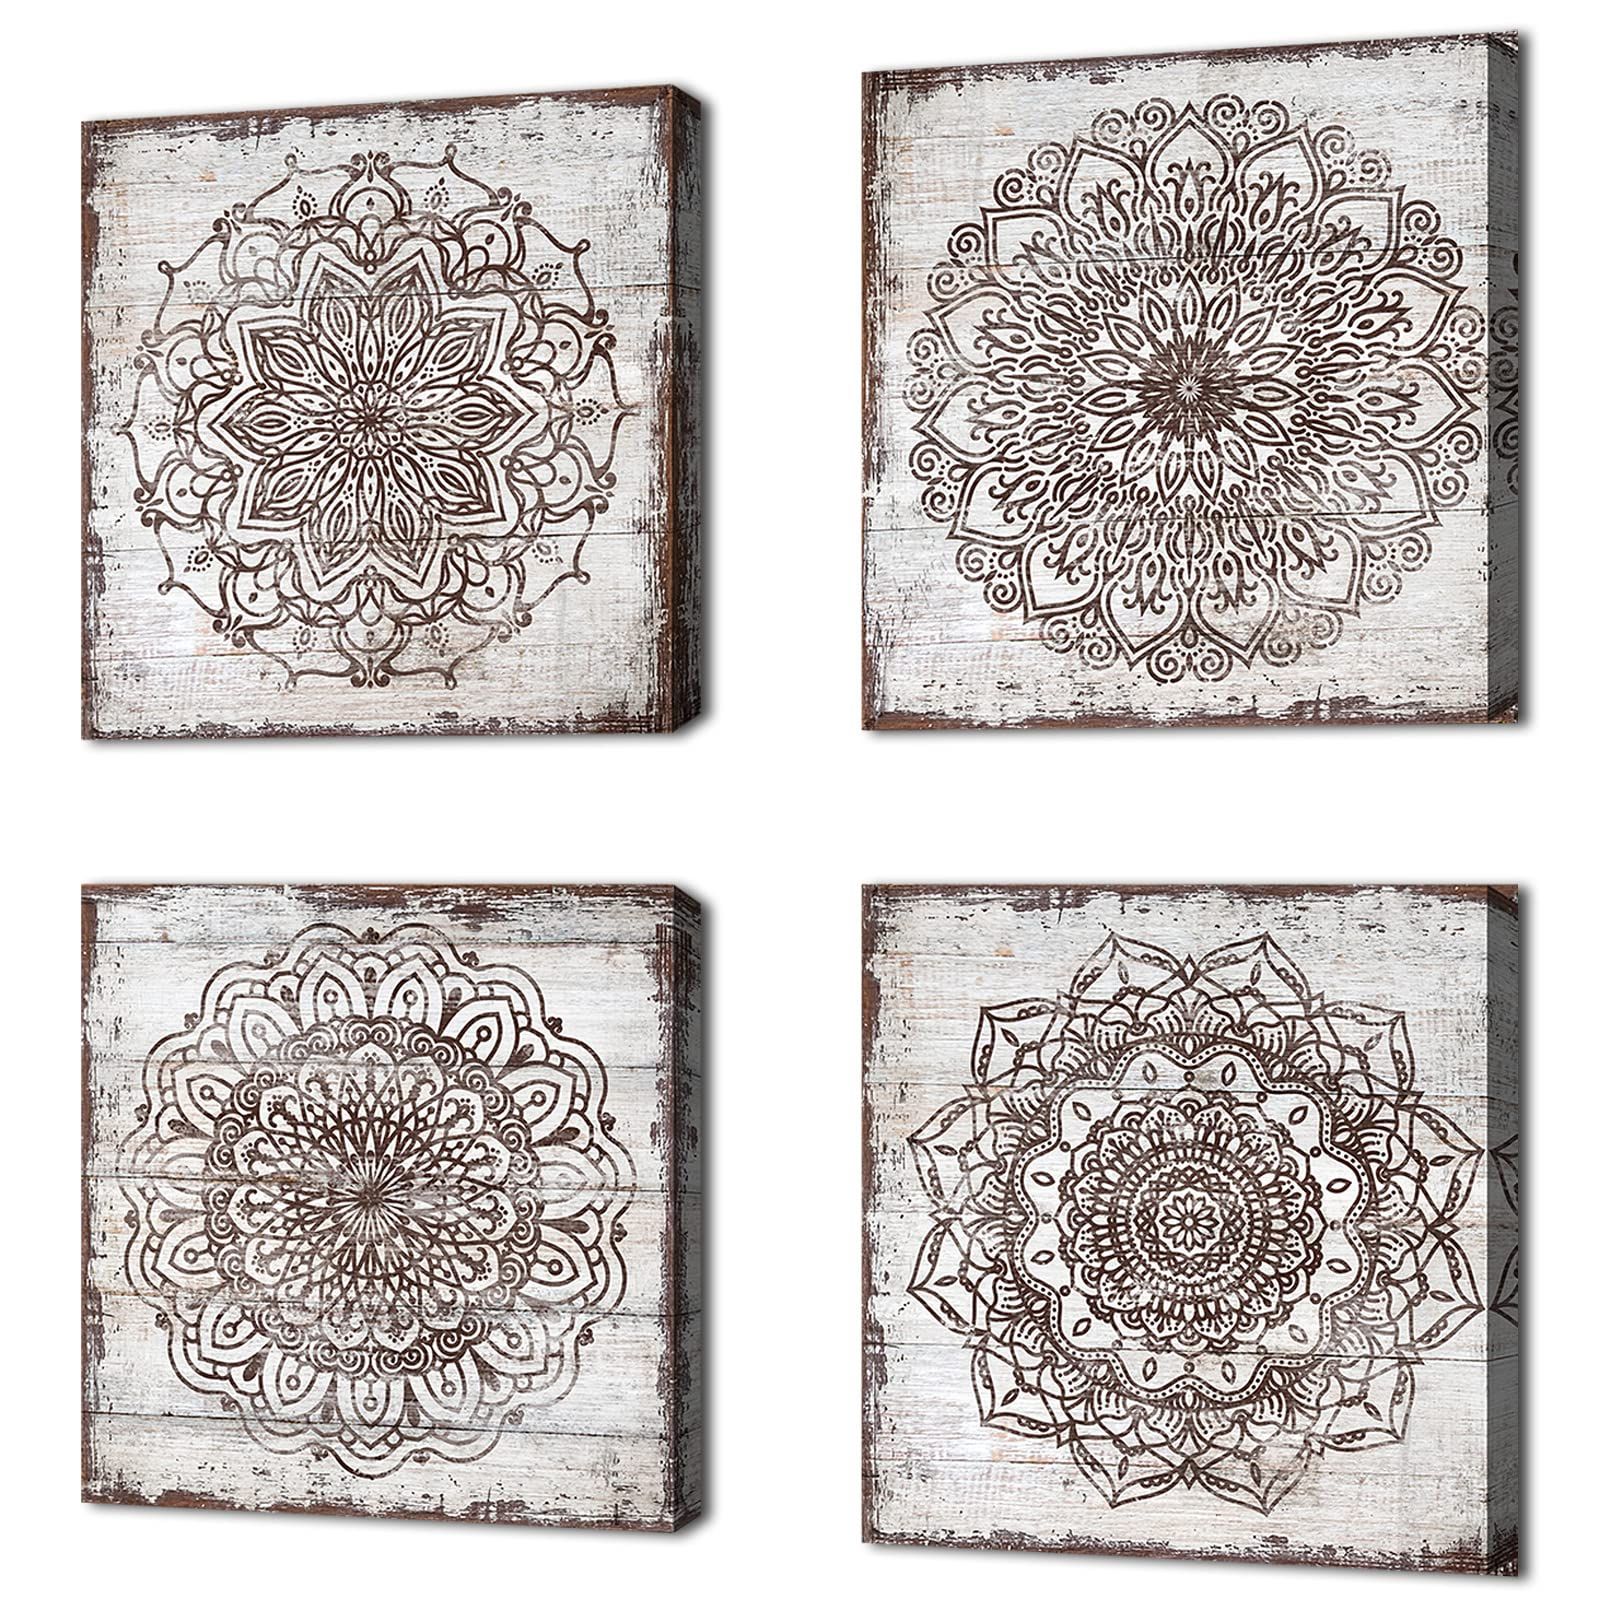 Most Recent Vintage Rust Wall Art Inside Amazon: Vintage Flower Pattern Canvas Wall Art For Bedroom Wall Decor  Rustic Bohe Floral Pictures Rust Geometric Wood Planks Canvas Prints Artwork  For Bathroom Office Home Decoration 12" X 12" X 4 (Photo 13 of 15)